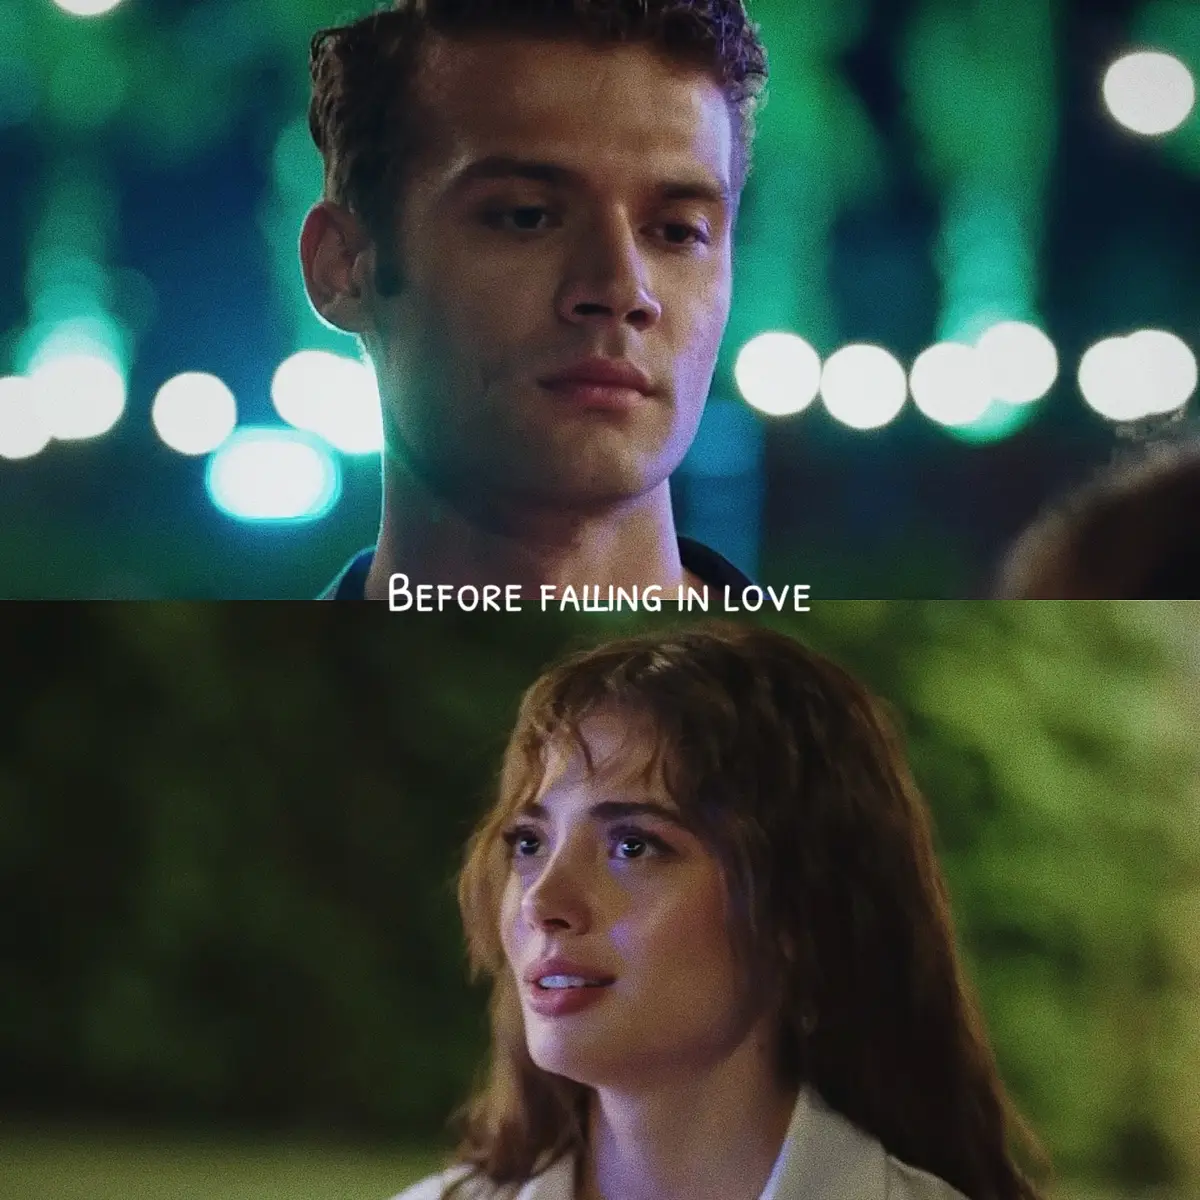 When they fall in love #turkishseries #duybeni #foryoupage #pageforyou #trending #fypシ゚ #fyppppppppppppppppppppppp #viralvideo 